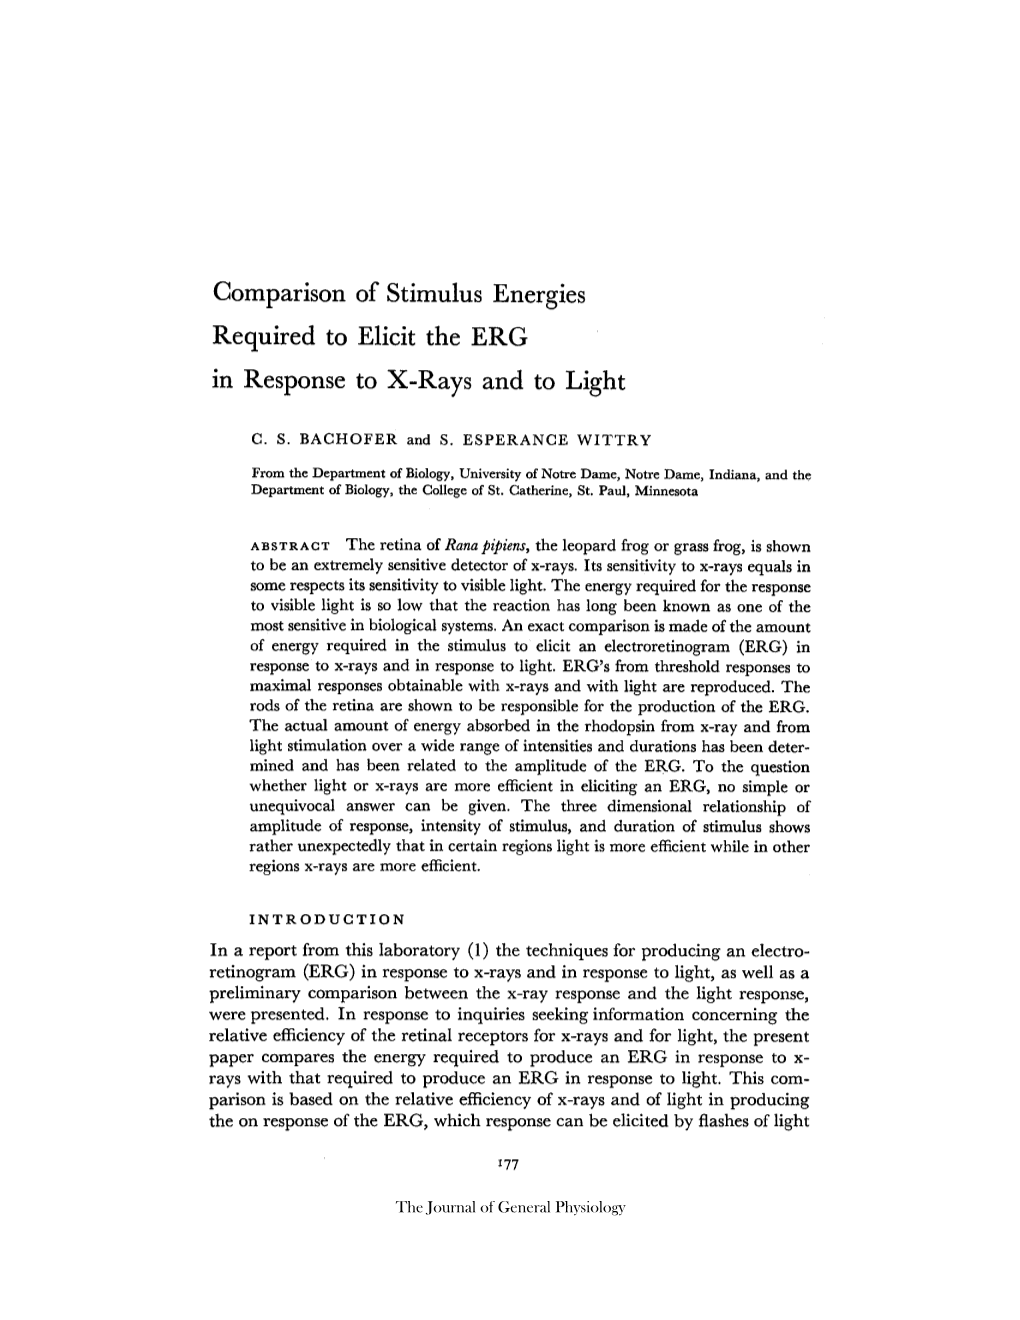 Comparison of Stimulus Energies Required to Elicit the ERG in Response to X-Rays and to Light